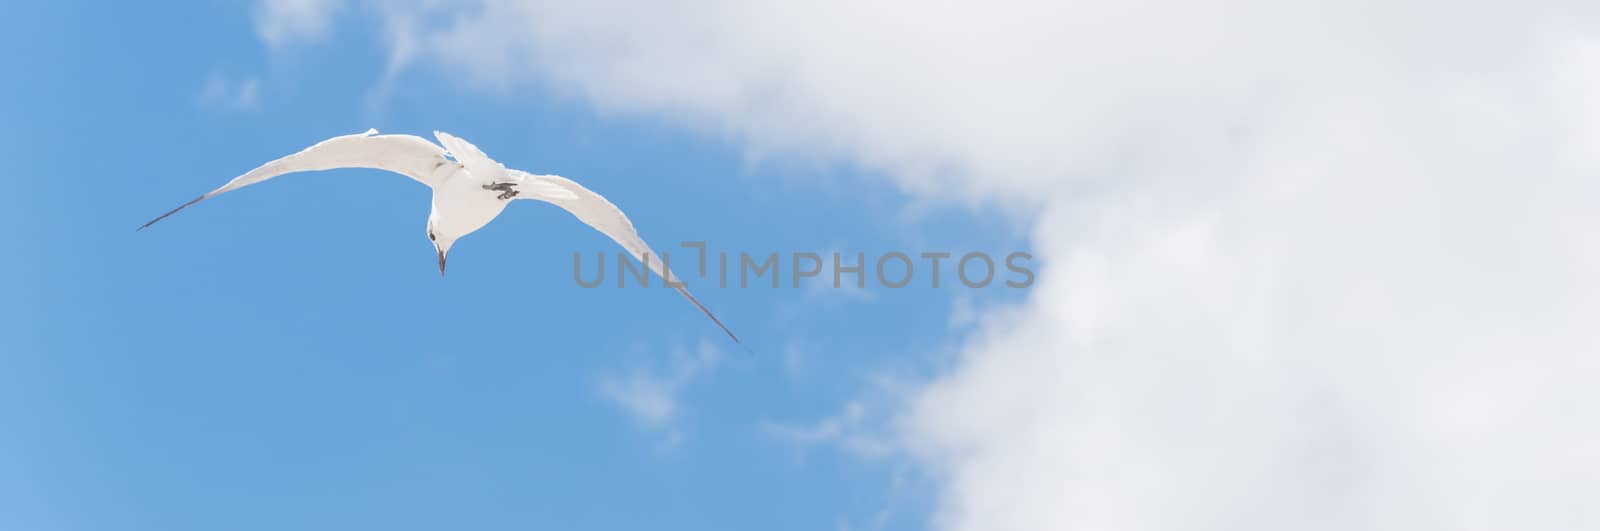 Panorama lookup view a large white seagull soaring on cloud blue sky. White wild bird flying against the sky. Freedom and leadership concept